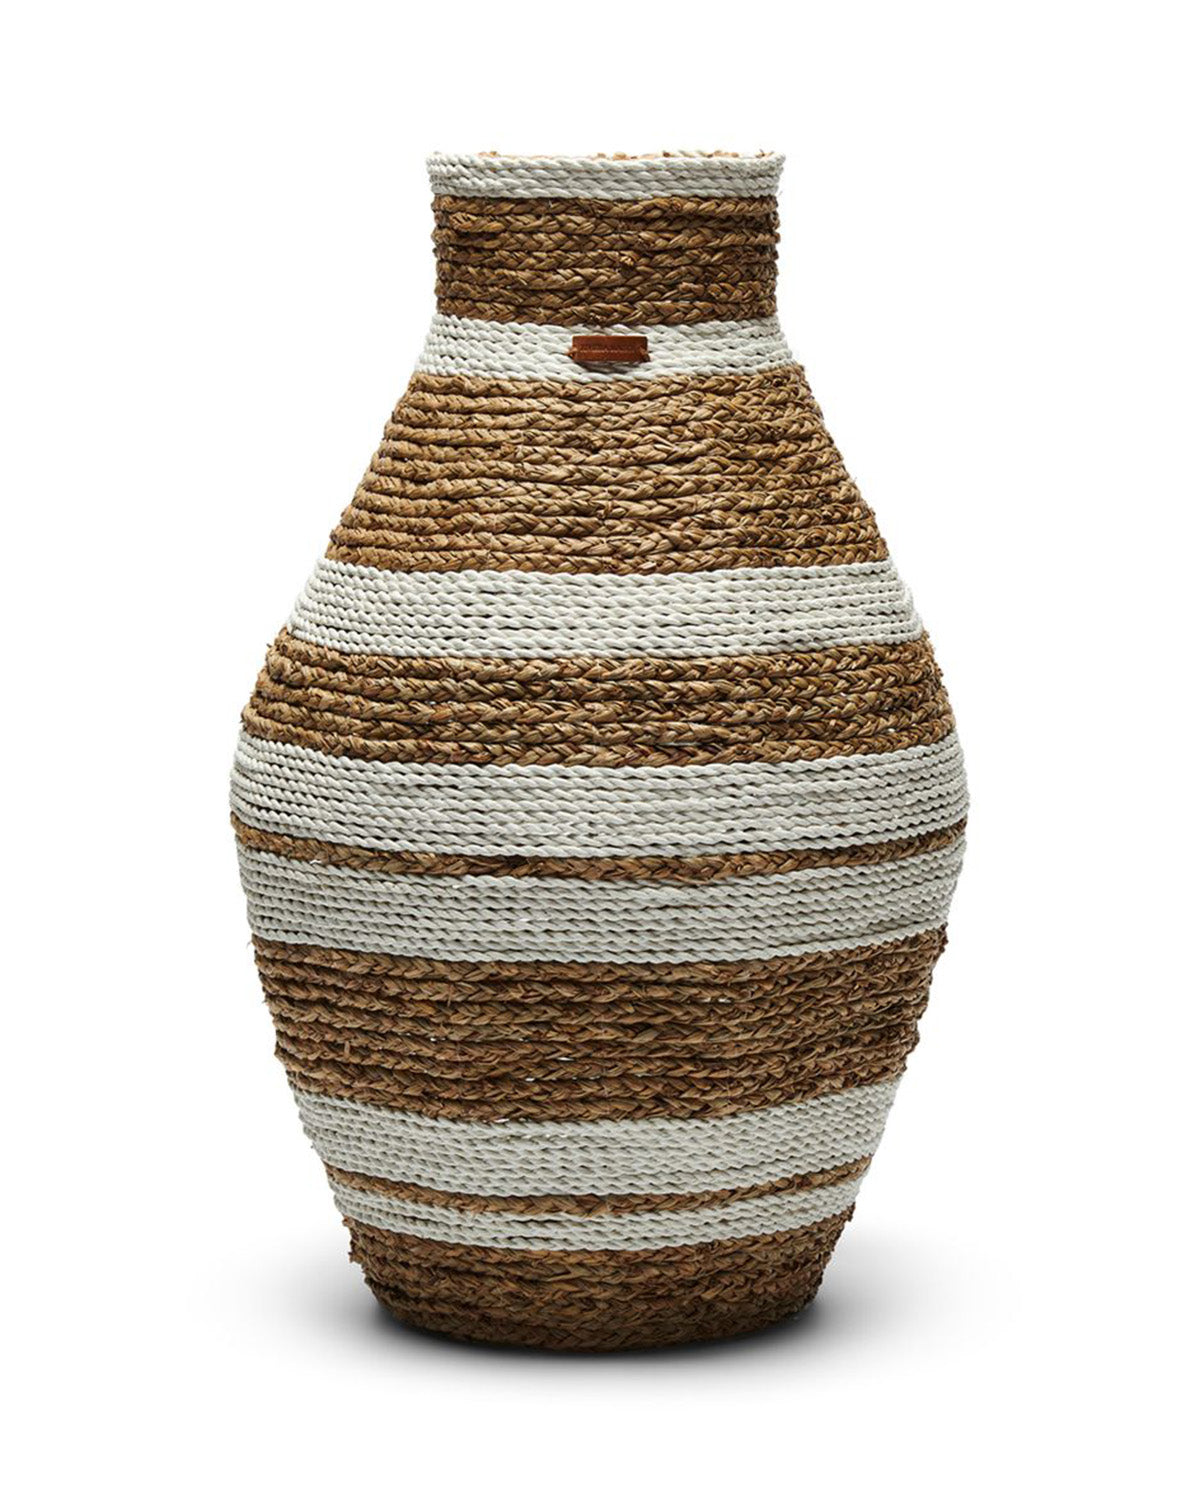 VASE made of raffia hand-woven, partially painted white by Riviera Maison